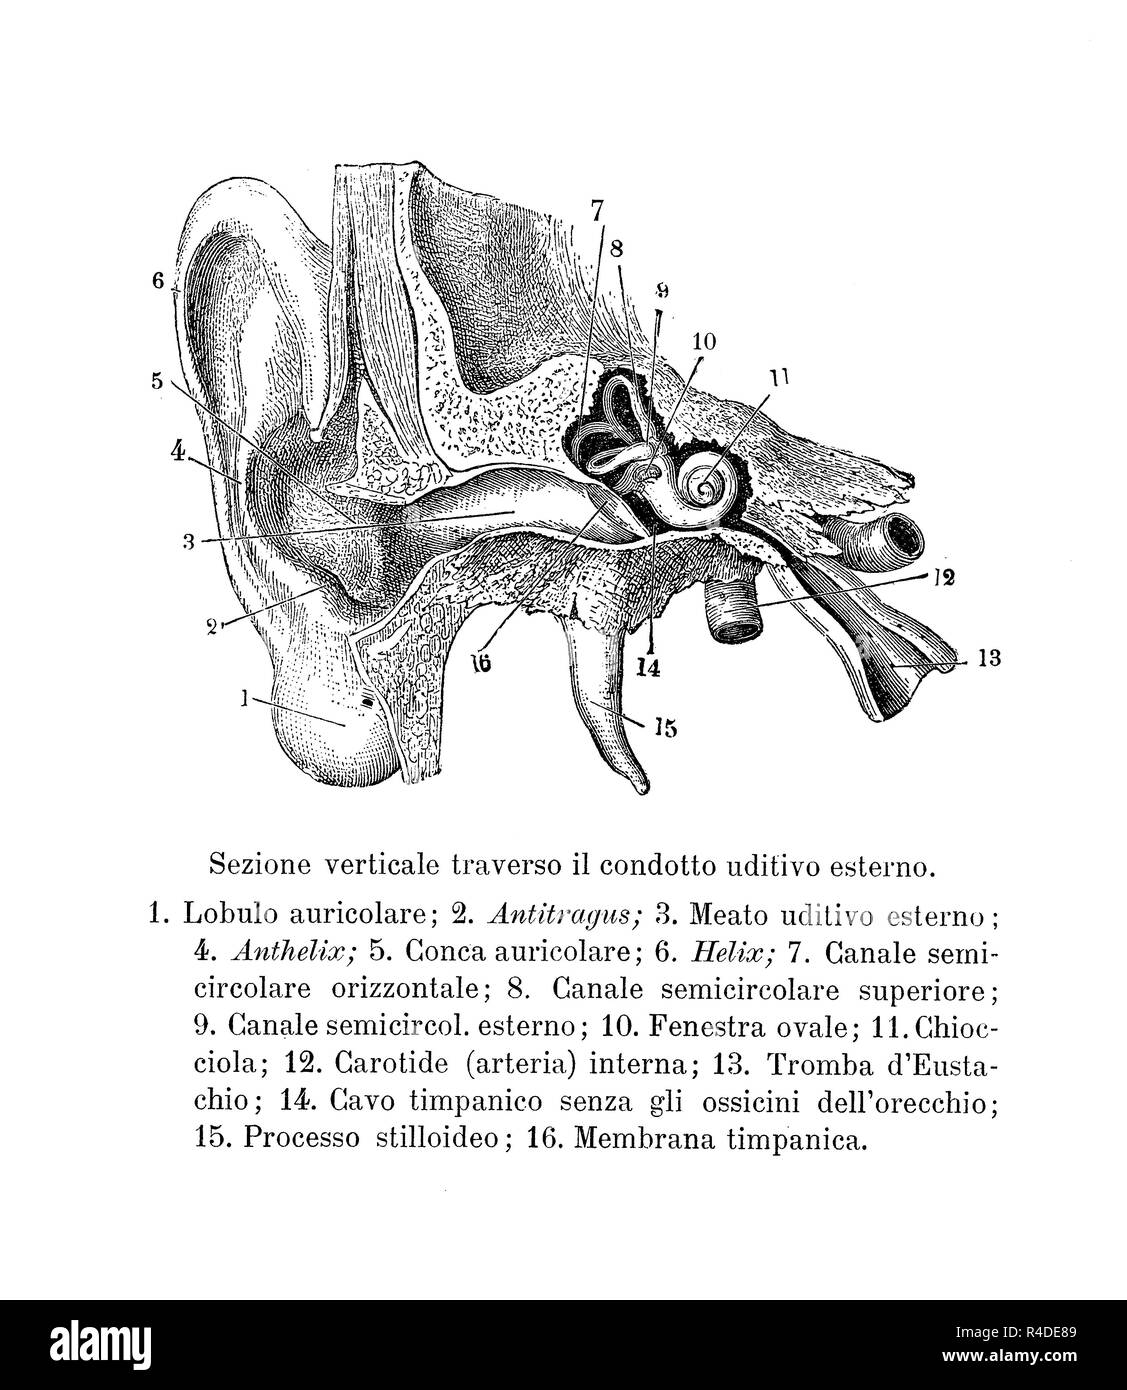 Vintage illustration of anatomy, transversal section of human ear and ear canal with anatomical descriptions in Italian Stock Photo